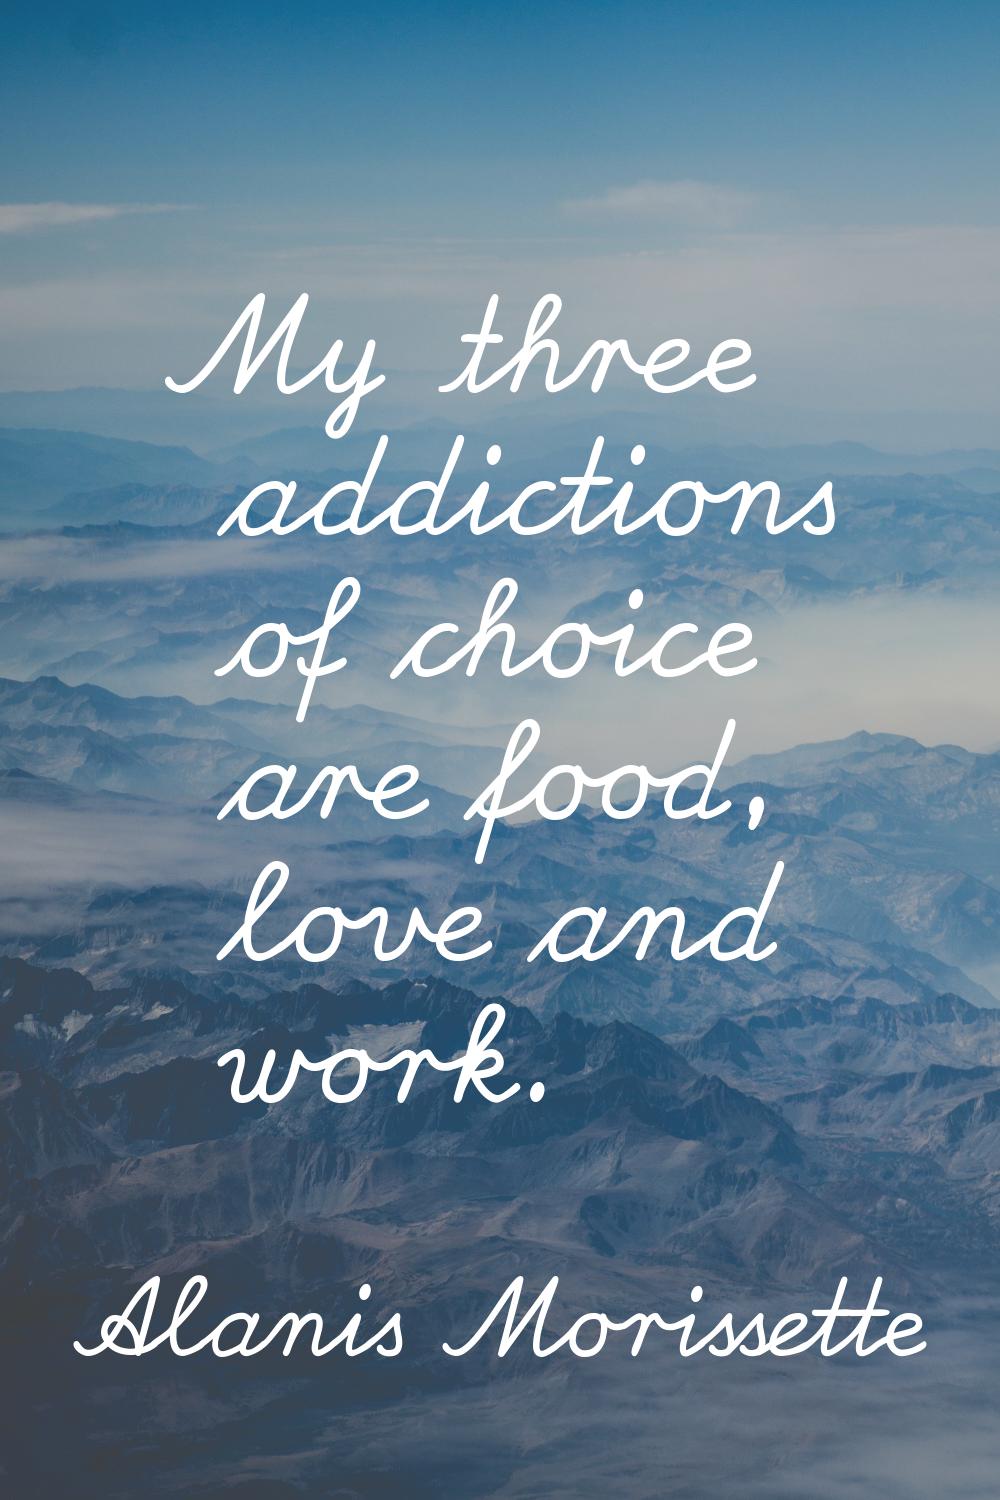 My three addictions of choice are food, love and work.